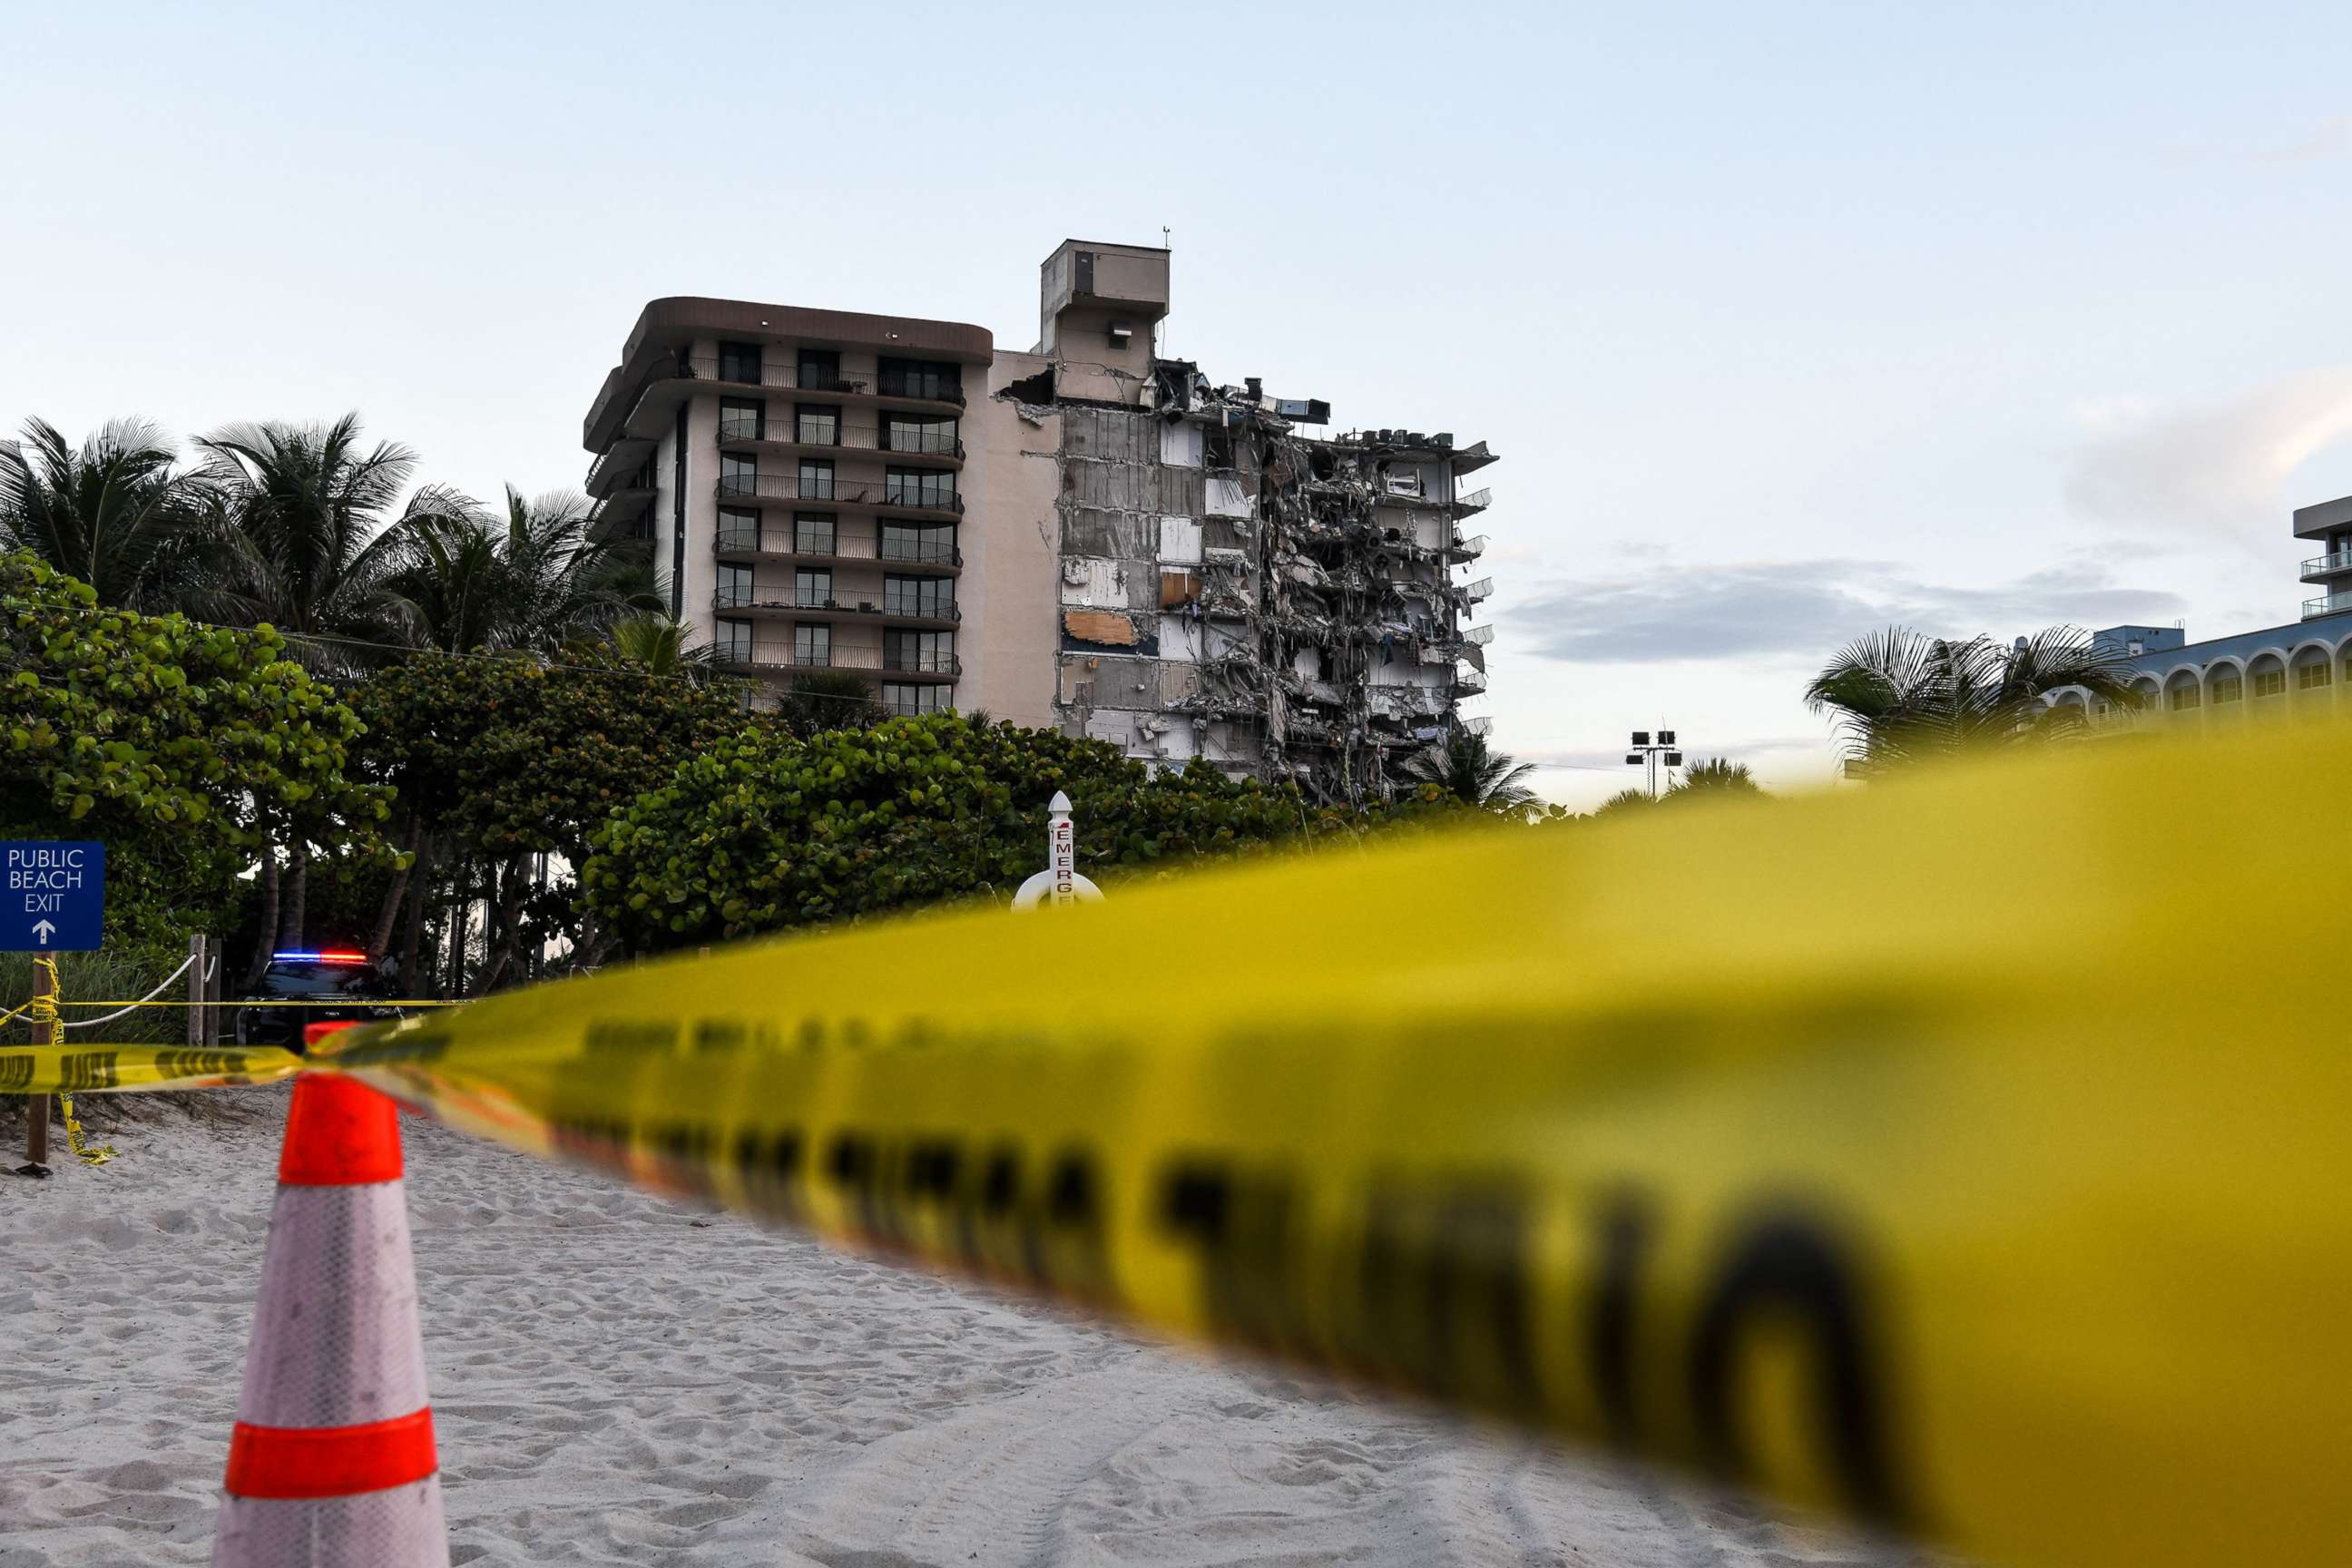 PHOTO: Police tape blocks access to a partially collapsed building in Surfside north of Miami Beach, on June 24, 2021.